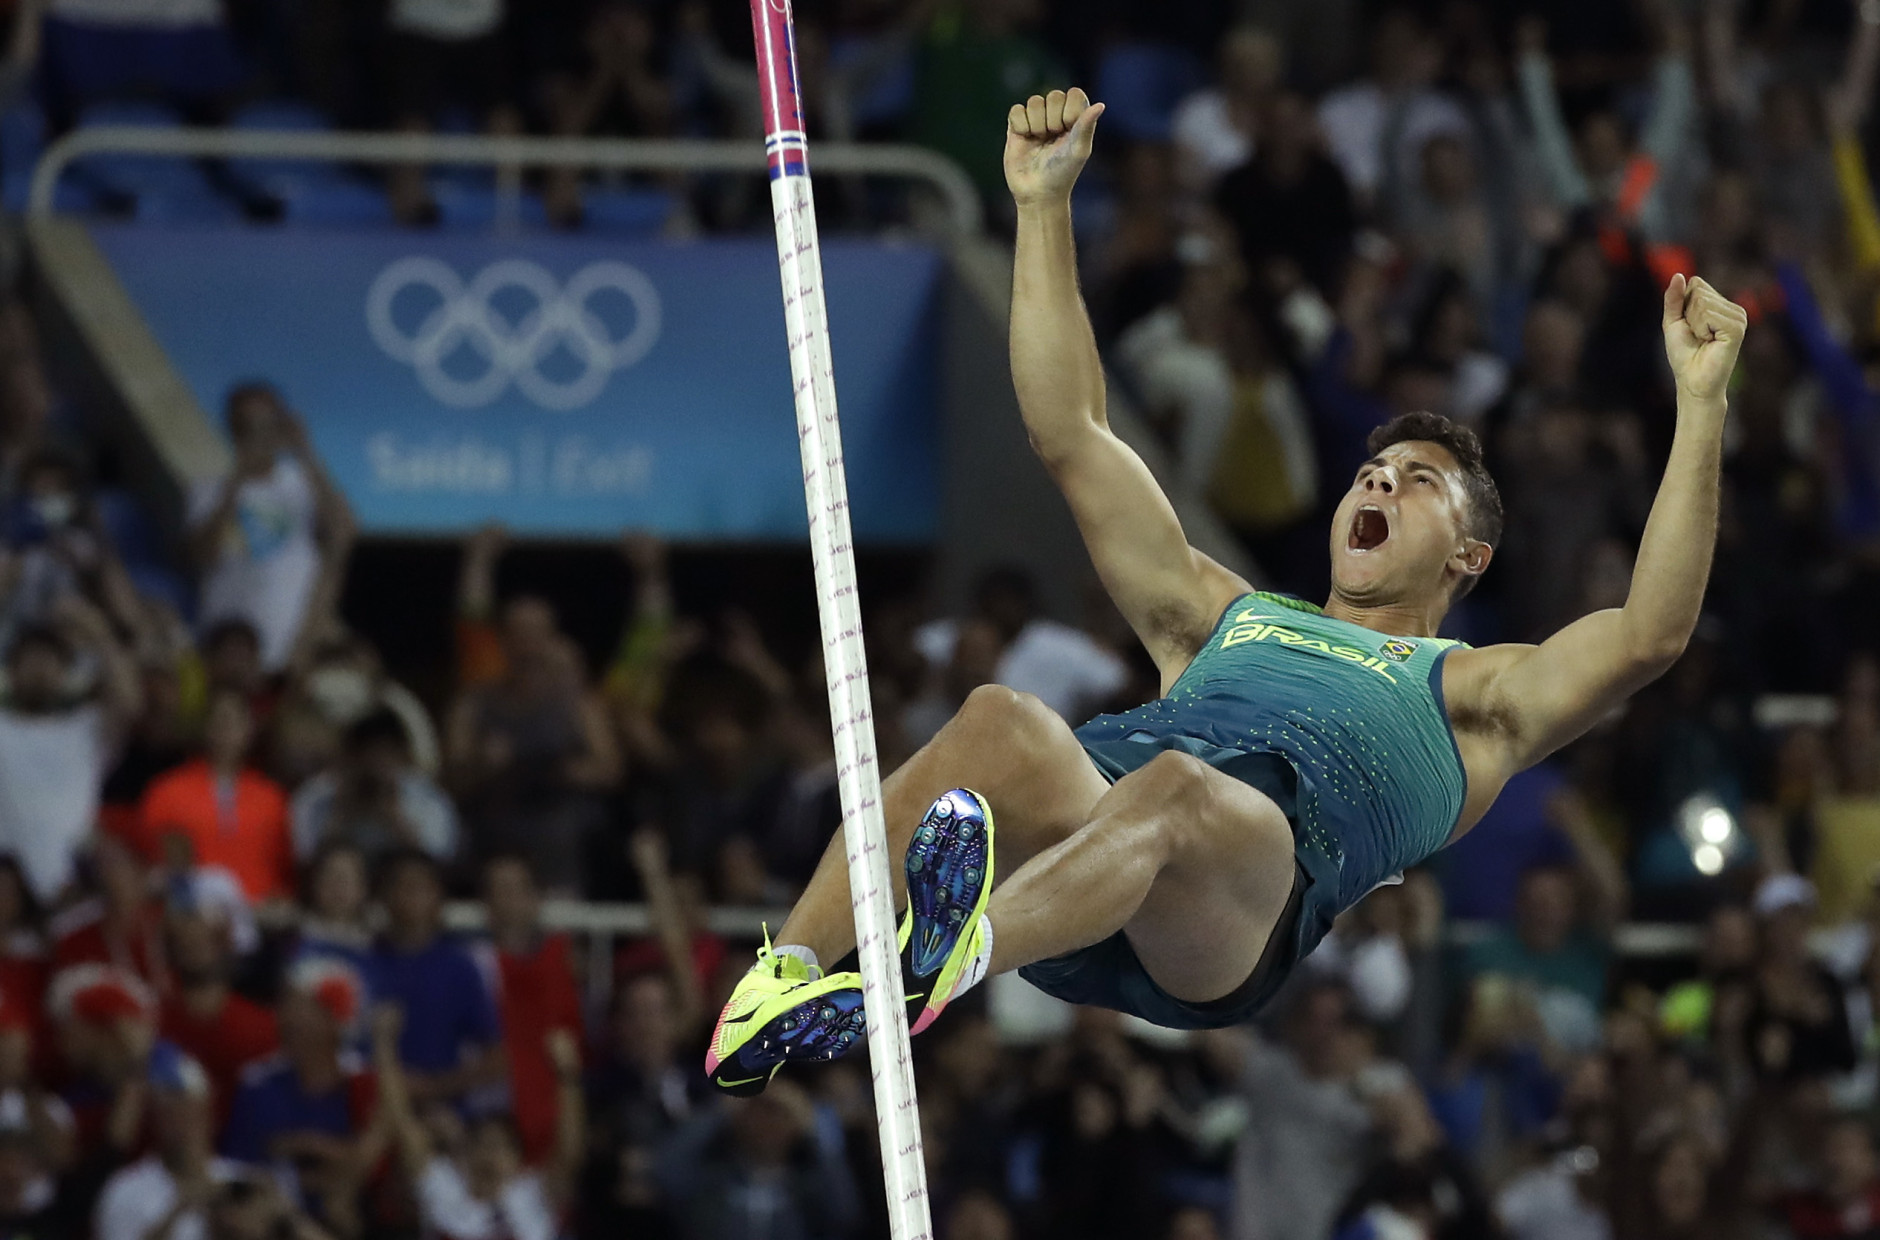 Brazil's Thiago Braz Da Silva celebrates after clearing the bar to set new Olympic record during the athletics competitions of the 2016 Summer Olympics at the Olympic stadium in Rio de Janeiro, Brazil, Tuesday, Aug. 16, 2016. (AP Photo/Matt Dunham)